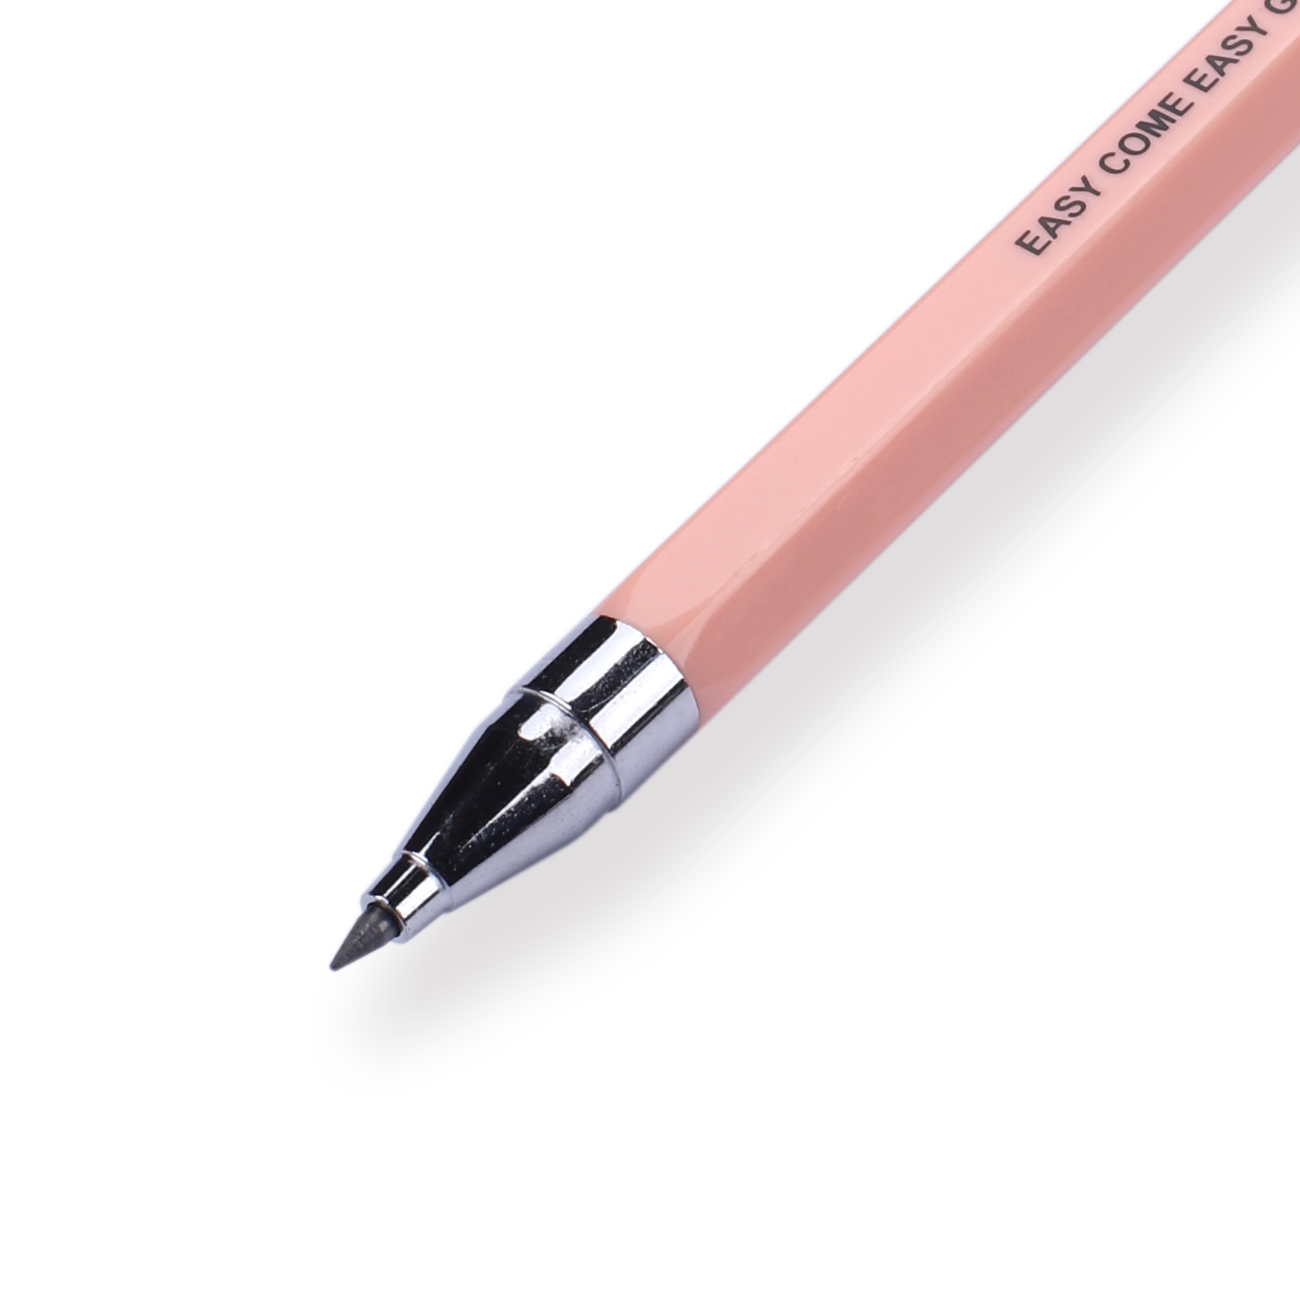 Mechanical Pencil with Built-in Sharpener - 2.0 mm - Pink - Stationery Pal